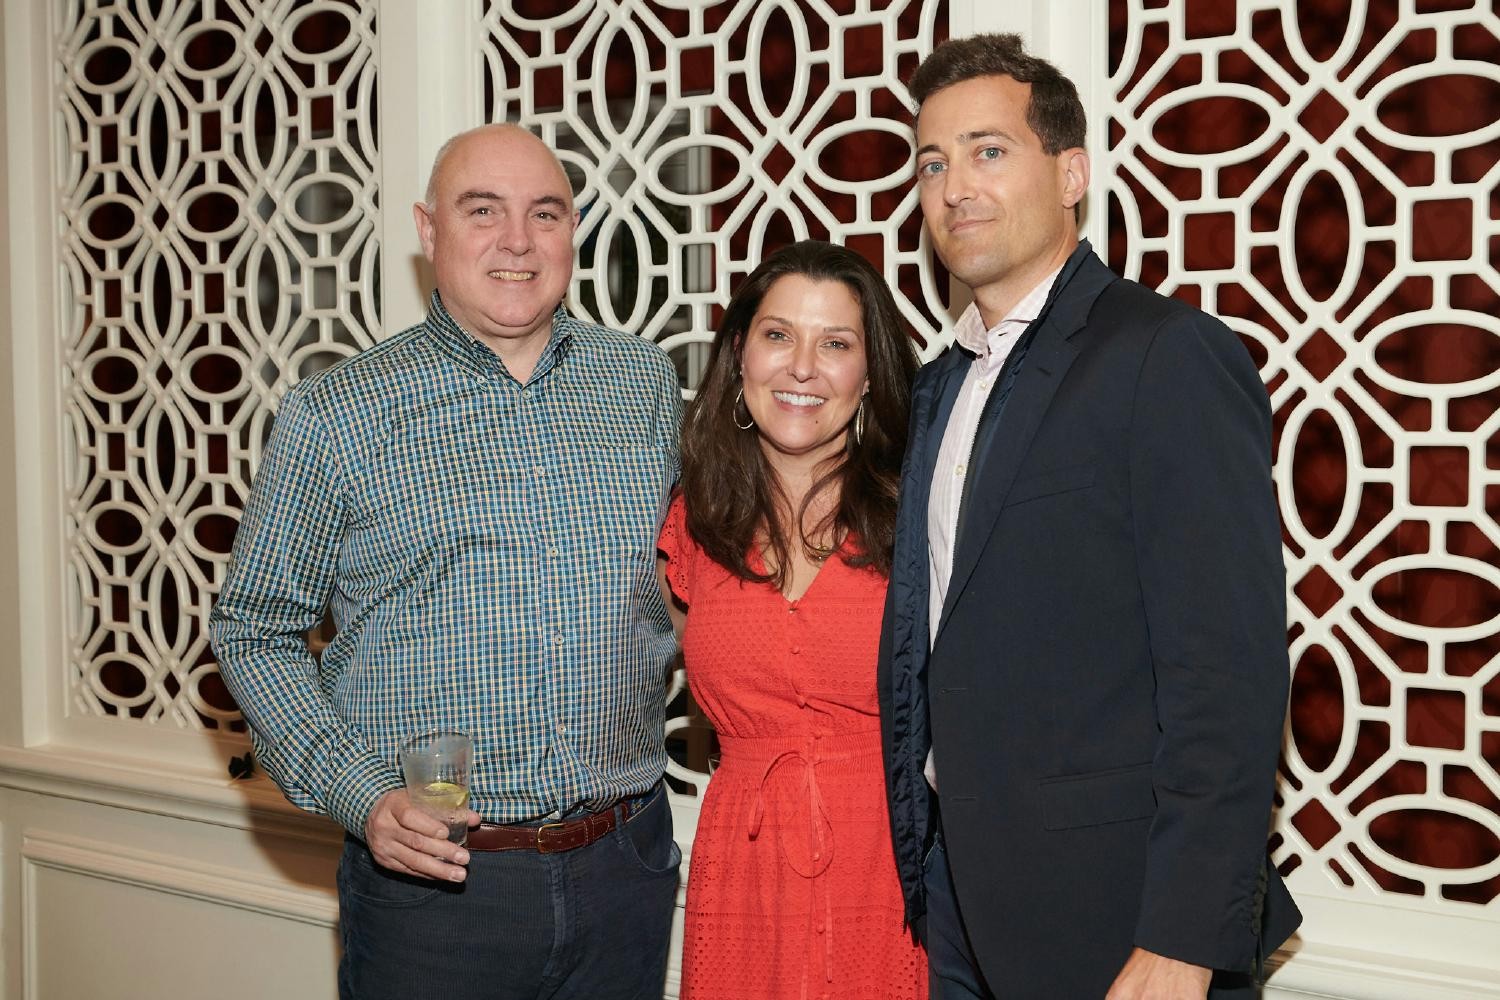 (Left to Right) Actualize Consulting Partner Matt Seu, COO Kerry Wekelo, and Principal Chad Wekelo. 